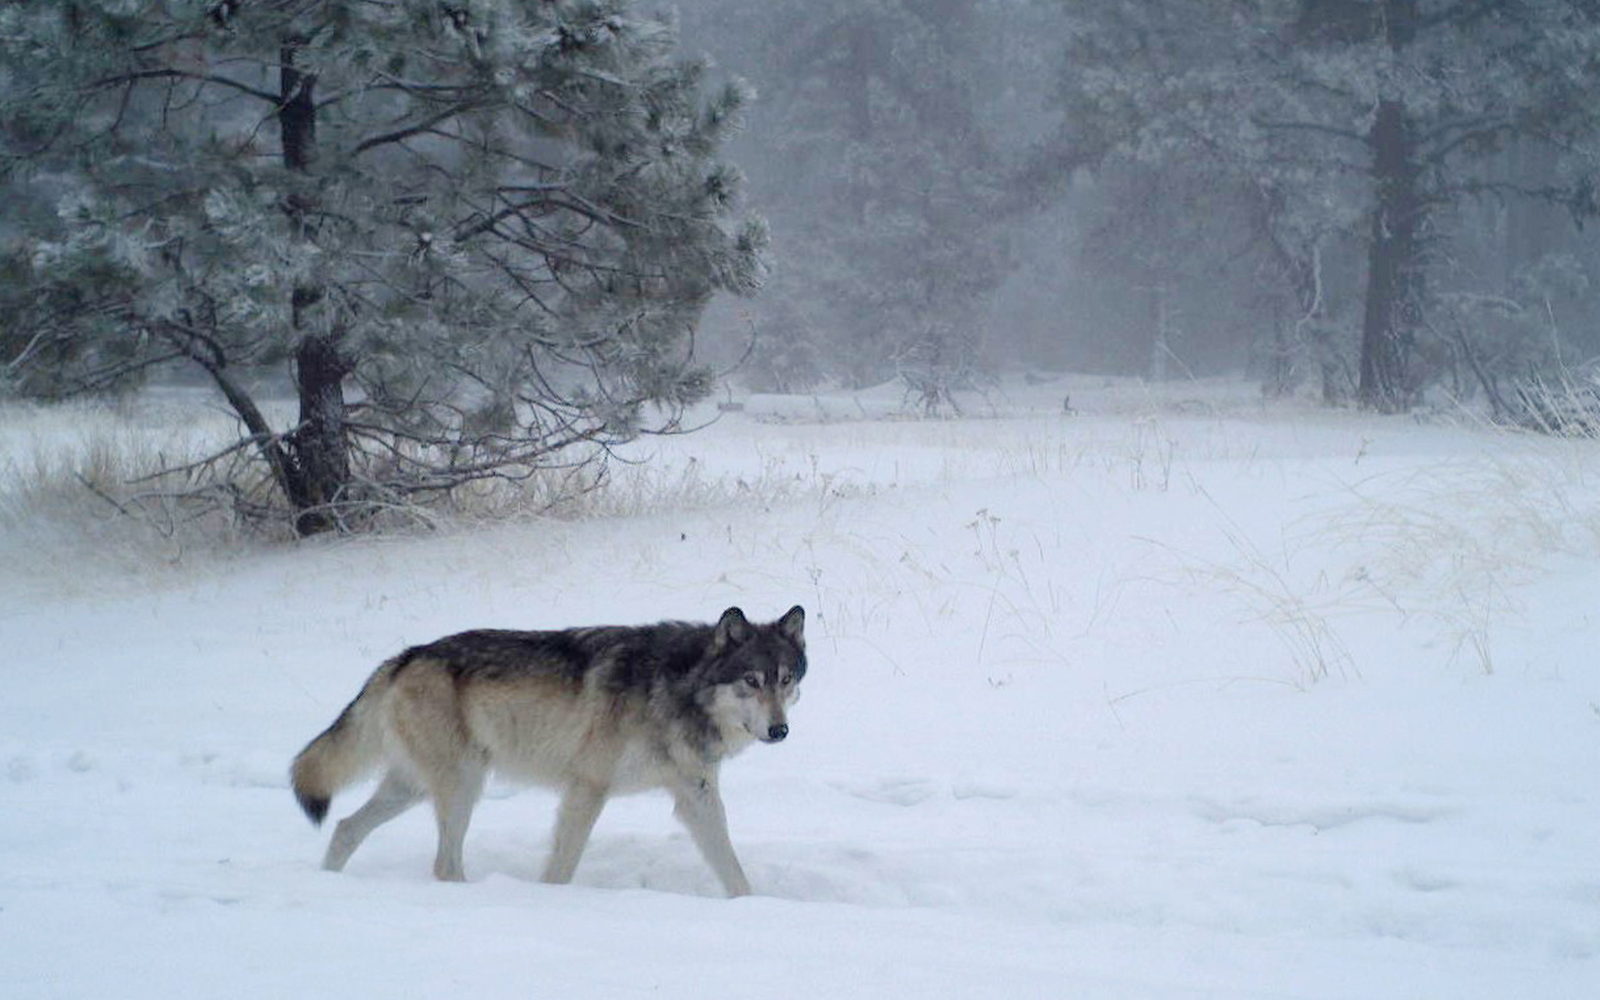 Press Release: Groups Offer Reward for Info on Wolf Killed Illegally